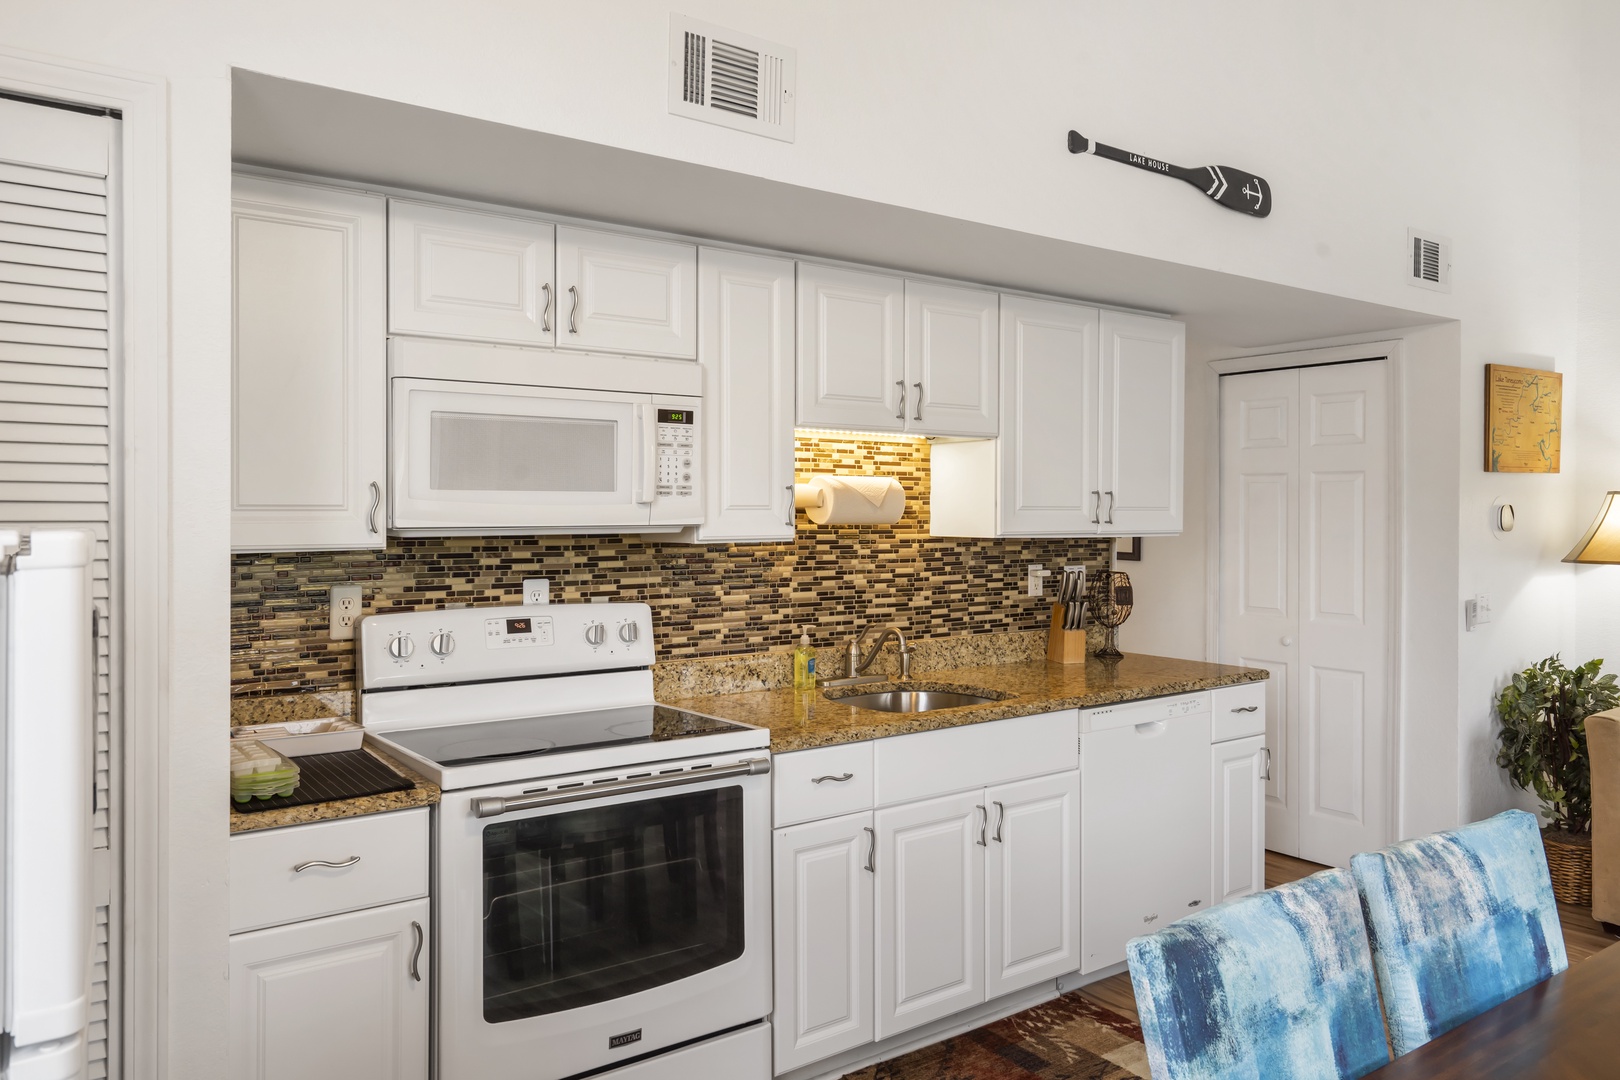 The sleek, efficient kitchen offers ample space & all the comforts of home